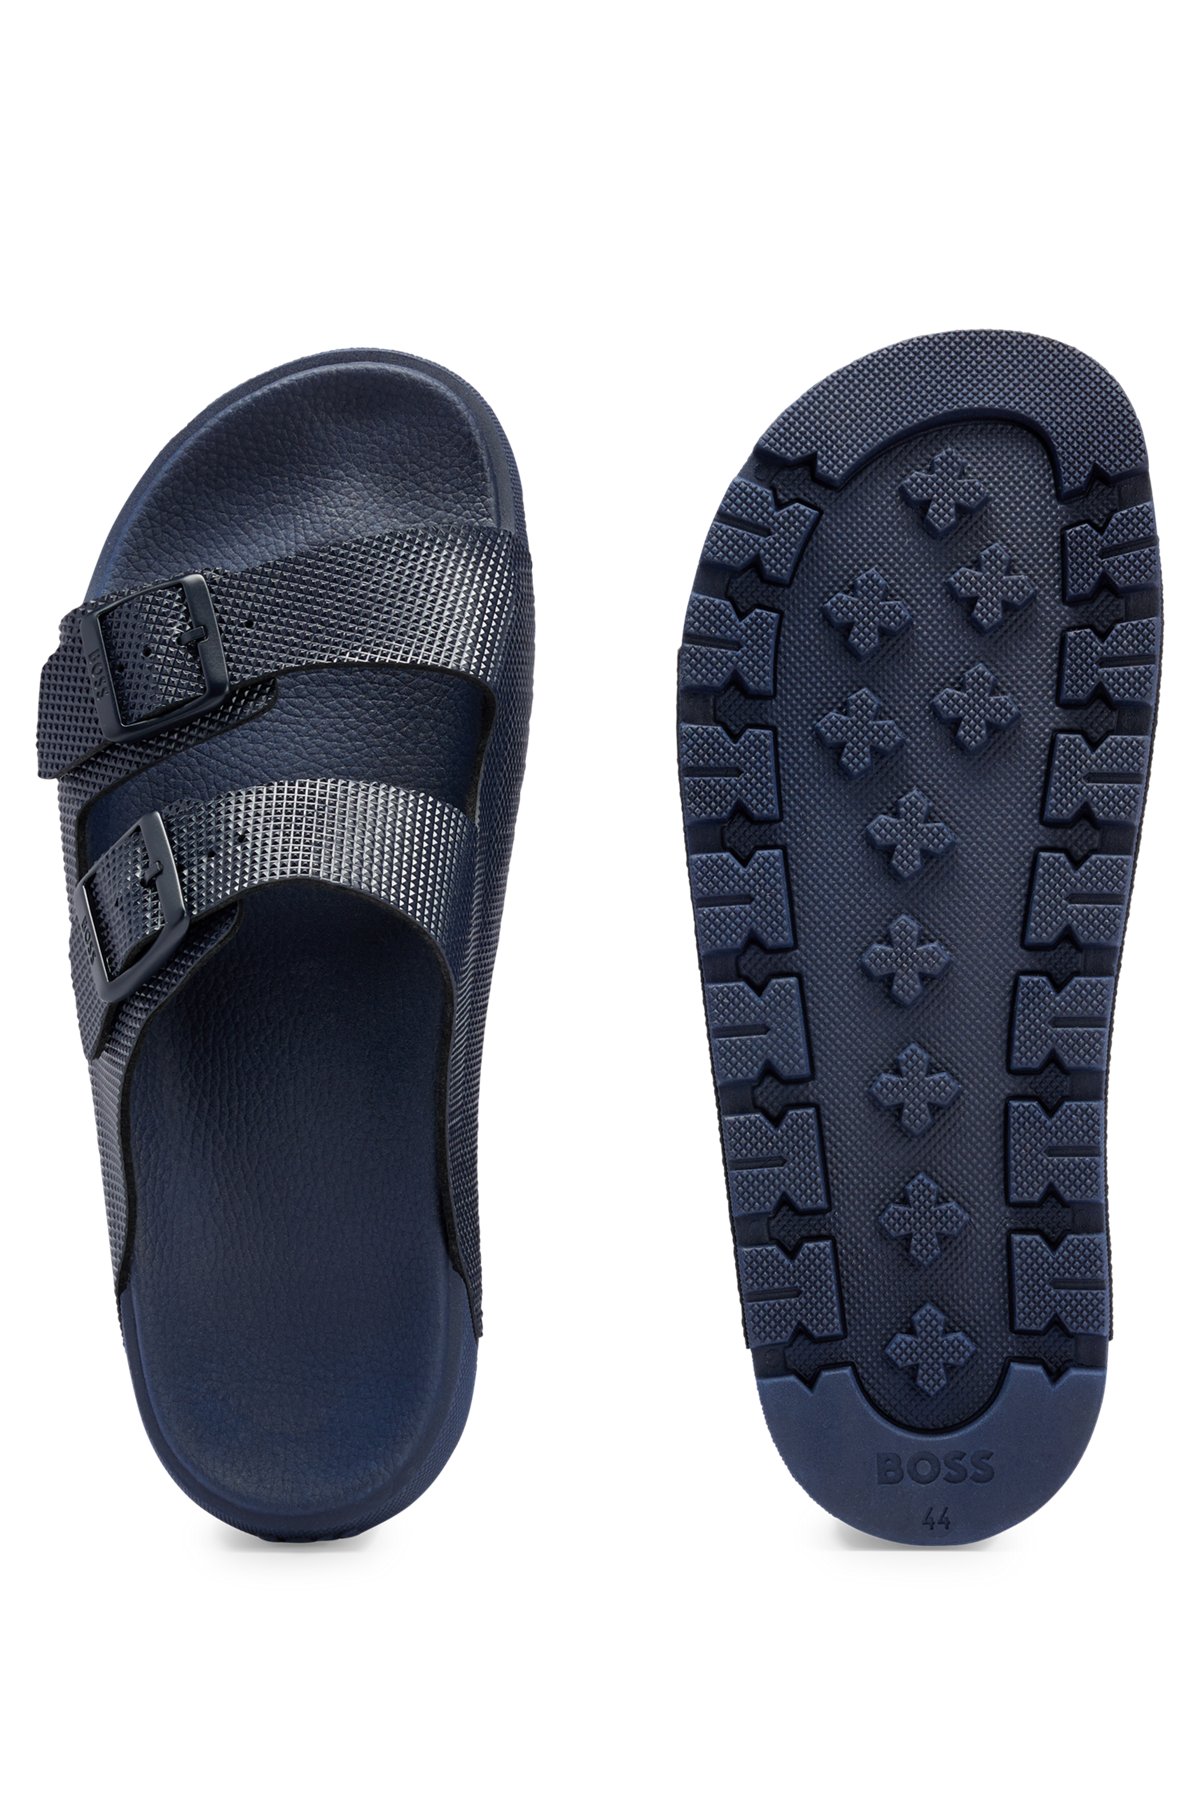 Twin-strap sandals with structured uppers, Dark Blue